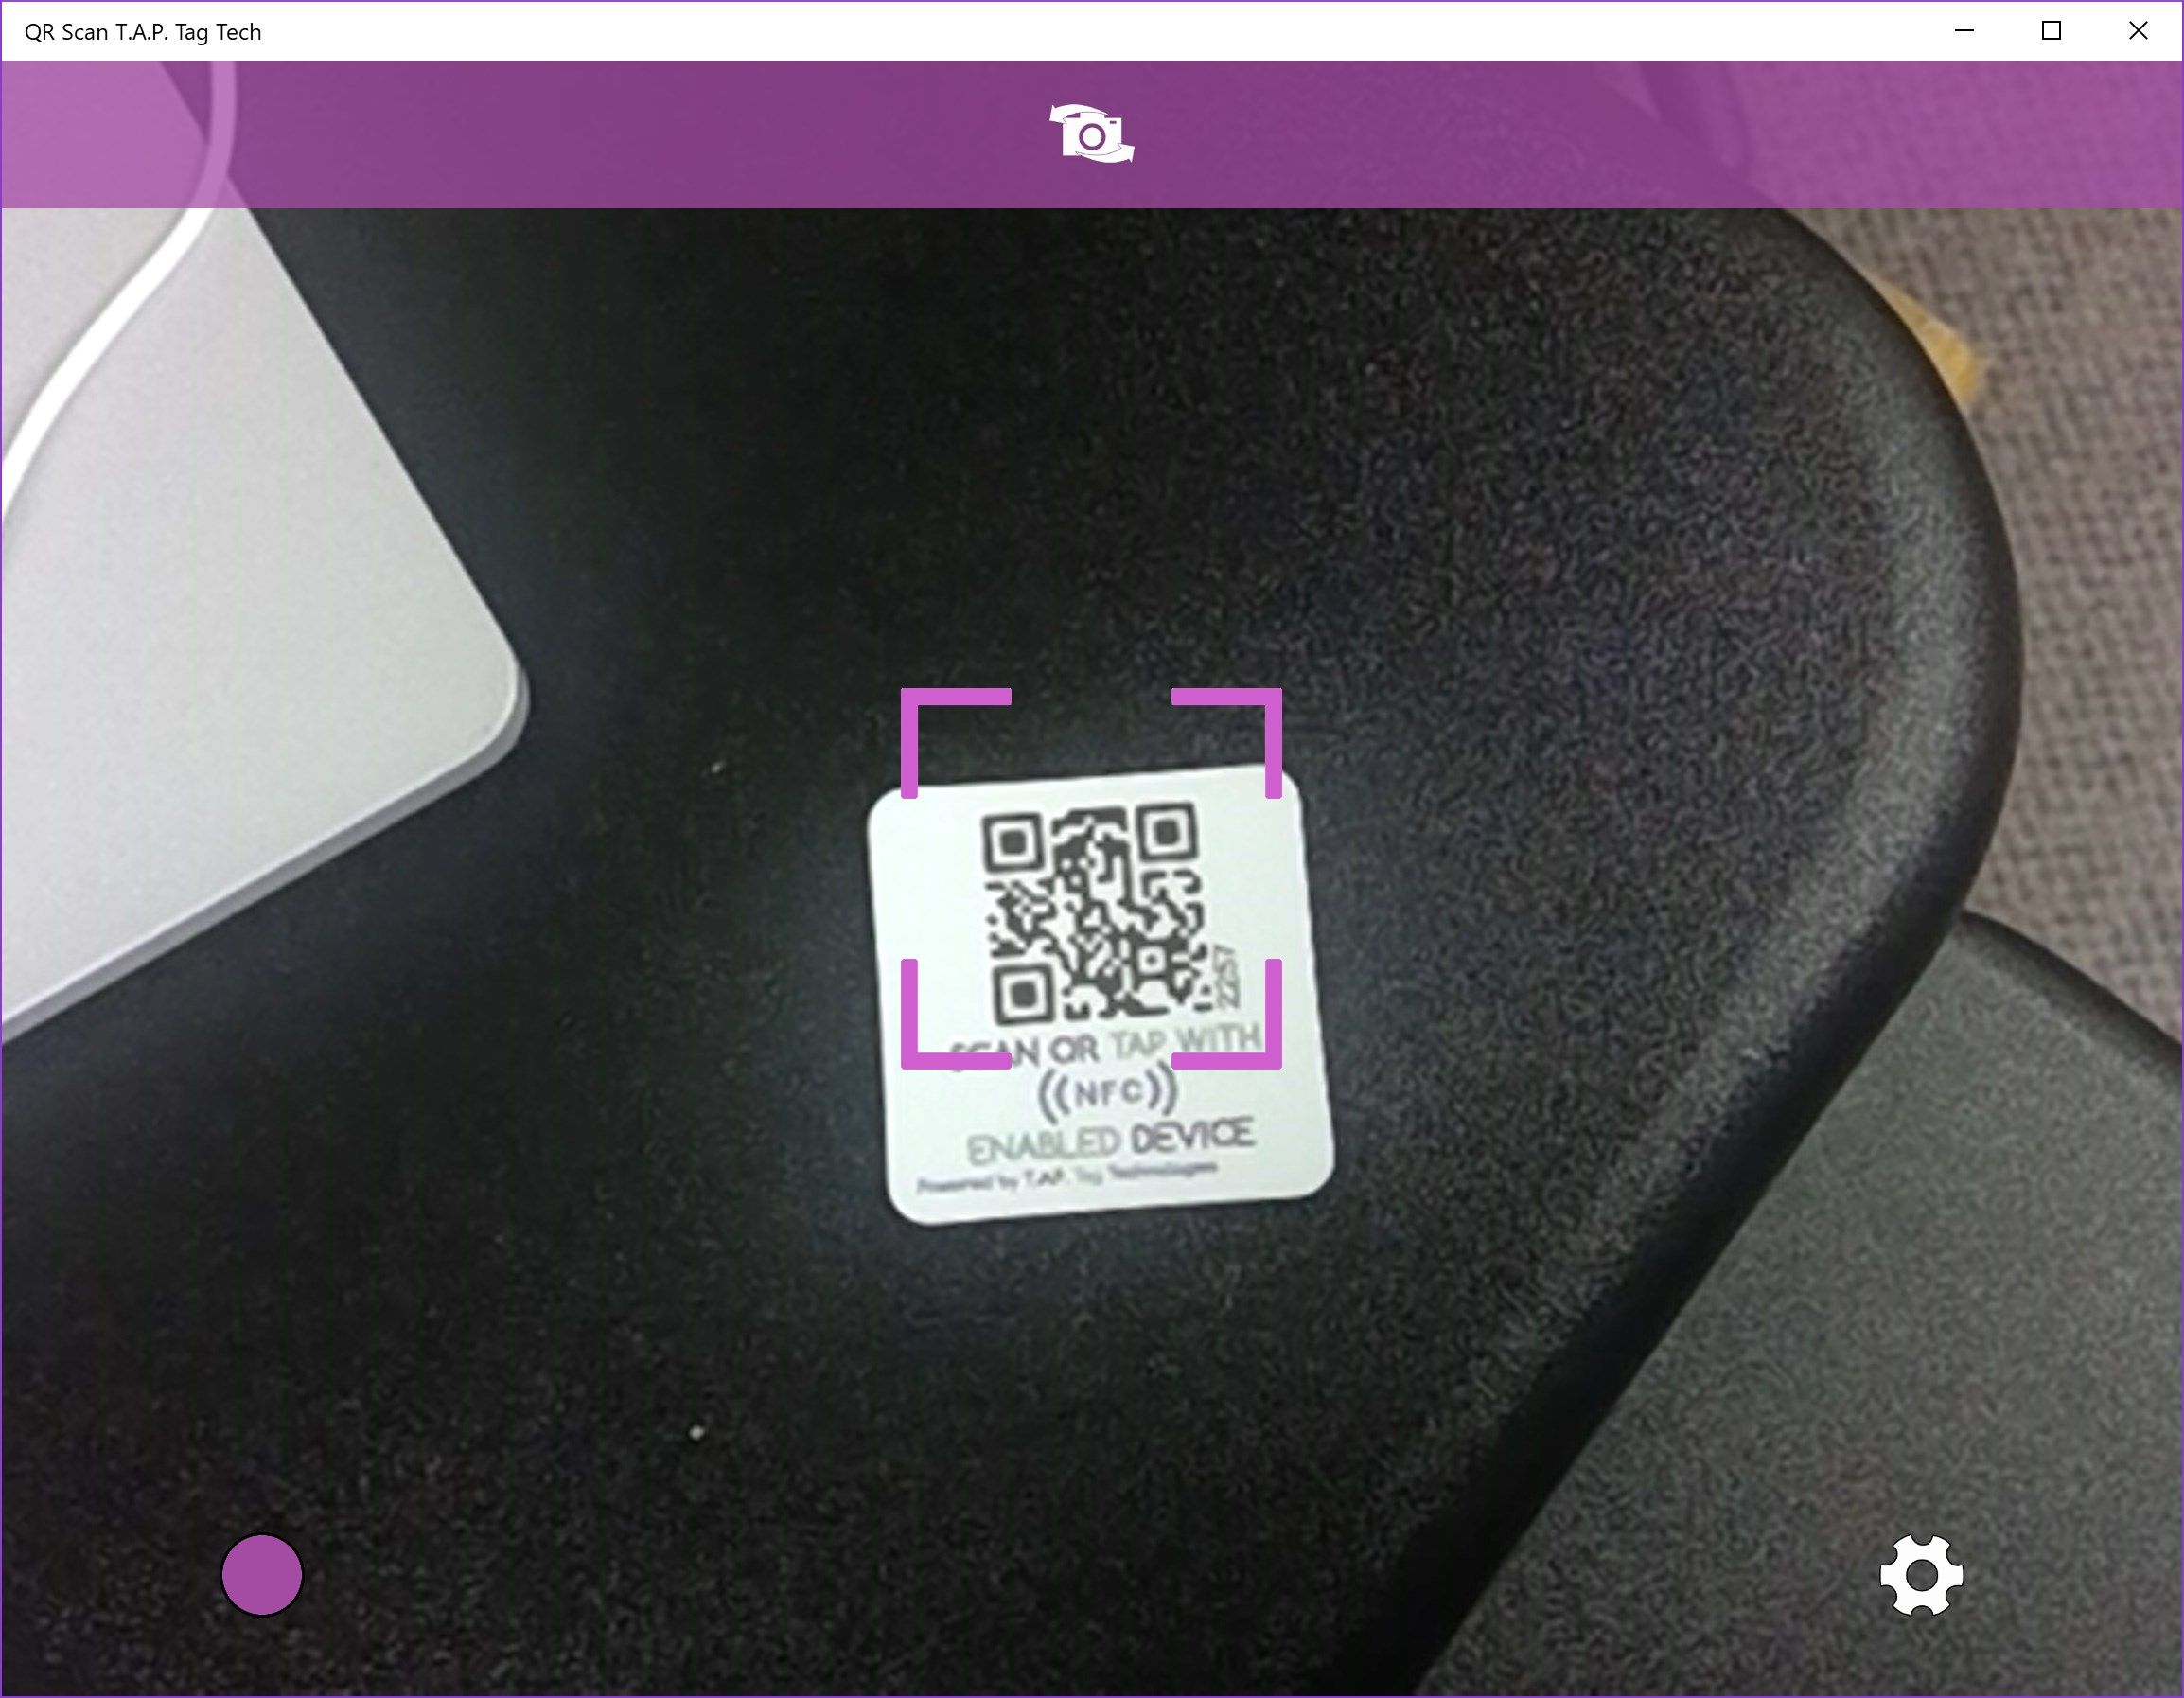 Scan a T.A.P. tag with a color context to open new content!